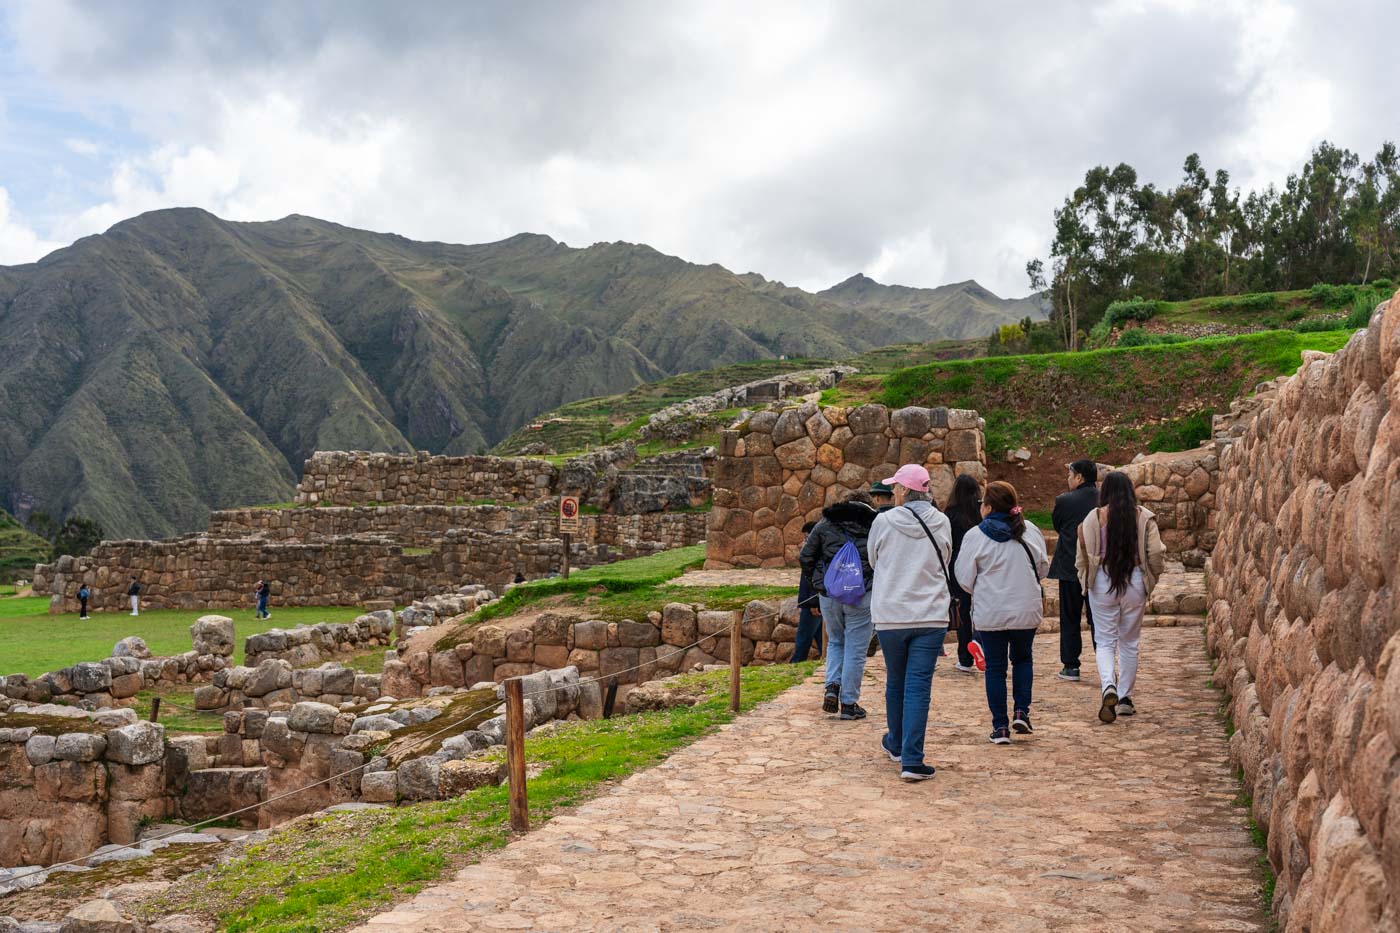 A group of tourists walking through Chinchero archeological site around the ruins of Inca walls and with a view of mountains.